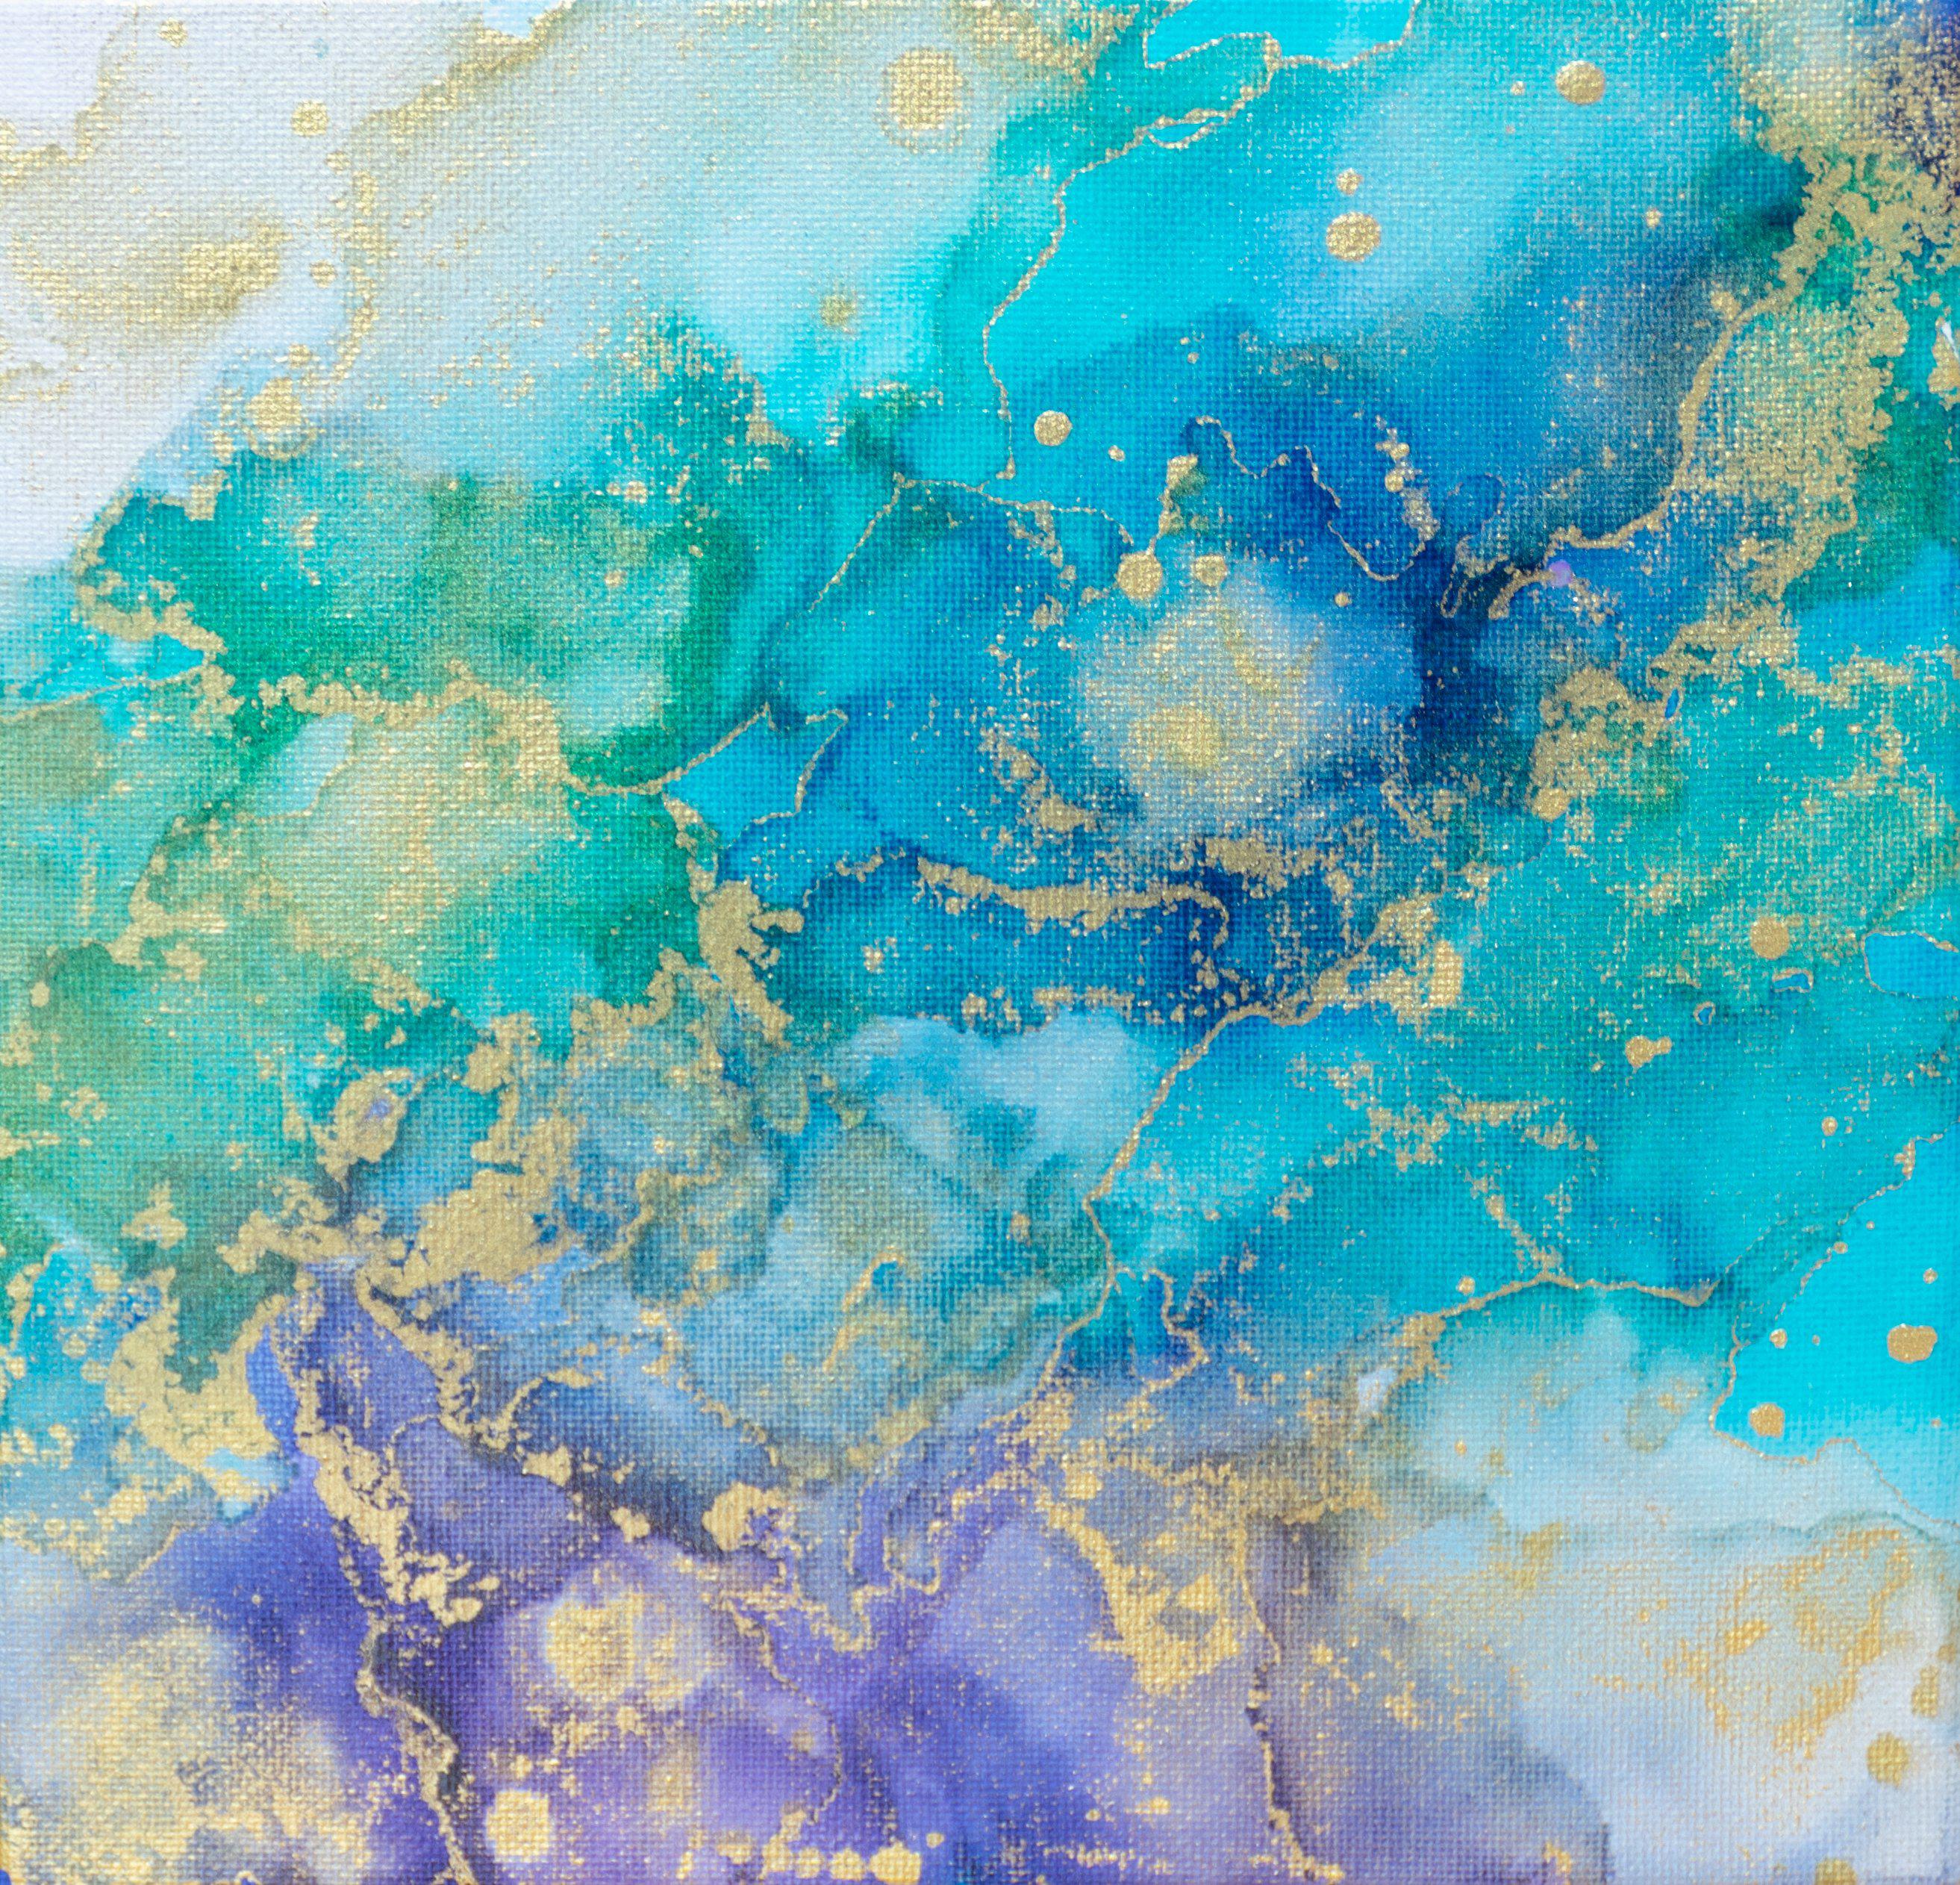 Alcohol Ink Backgrounds  How I use alcohol inks in my Bible